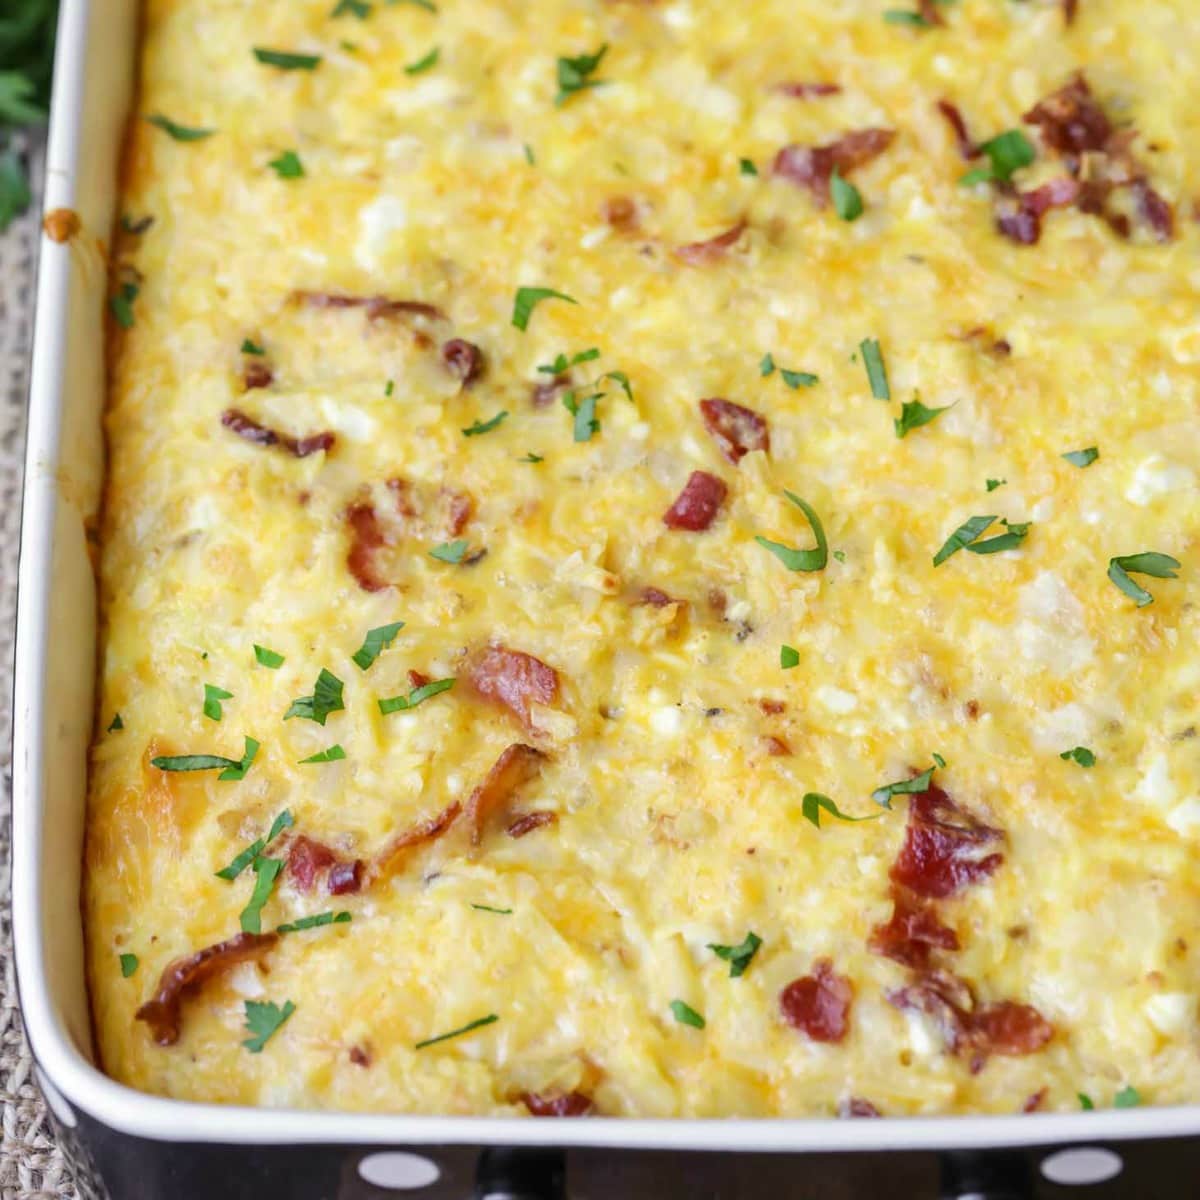 Breakfast casserole recipes - a baking dish filled with cheesy hash brown breakfast casserole.